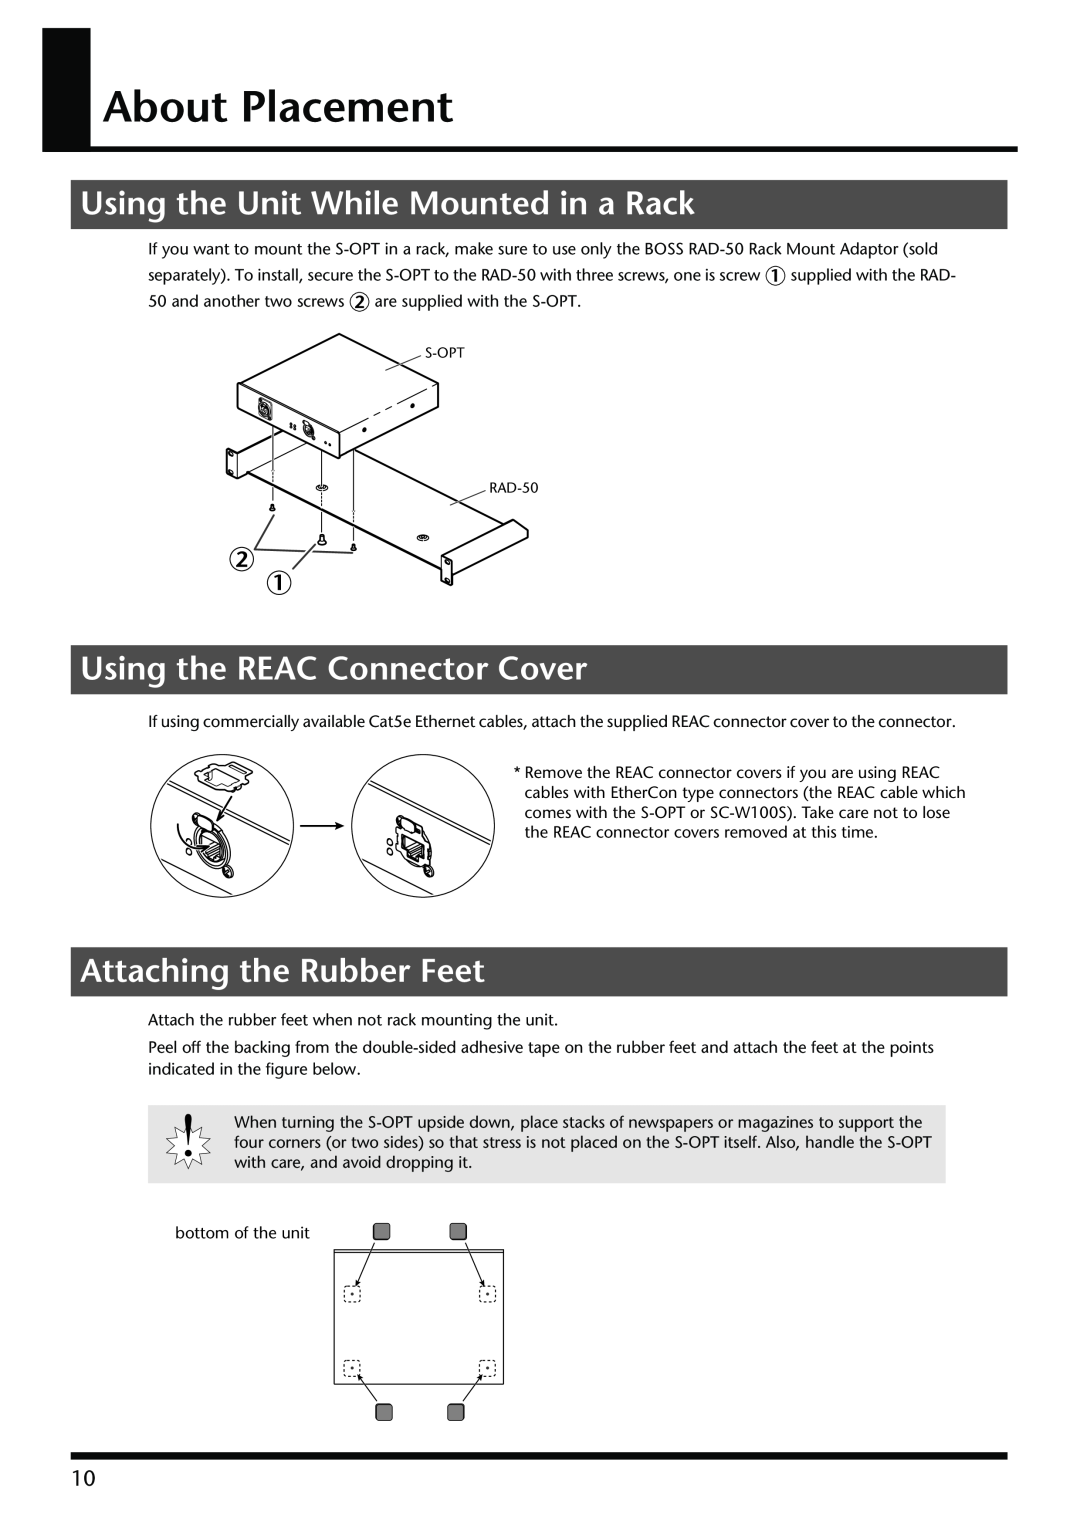 Roland S-OPT owner manual About Placement, Using the Unit While Mounted in a Rack, Using the REAC Connector Cover 